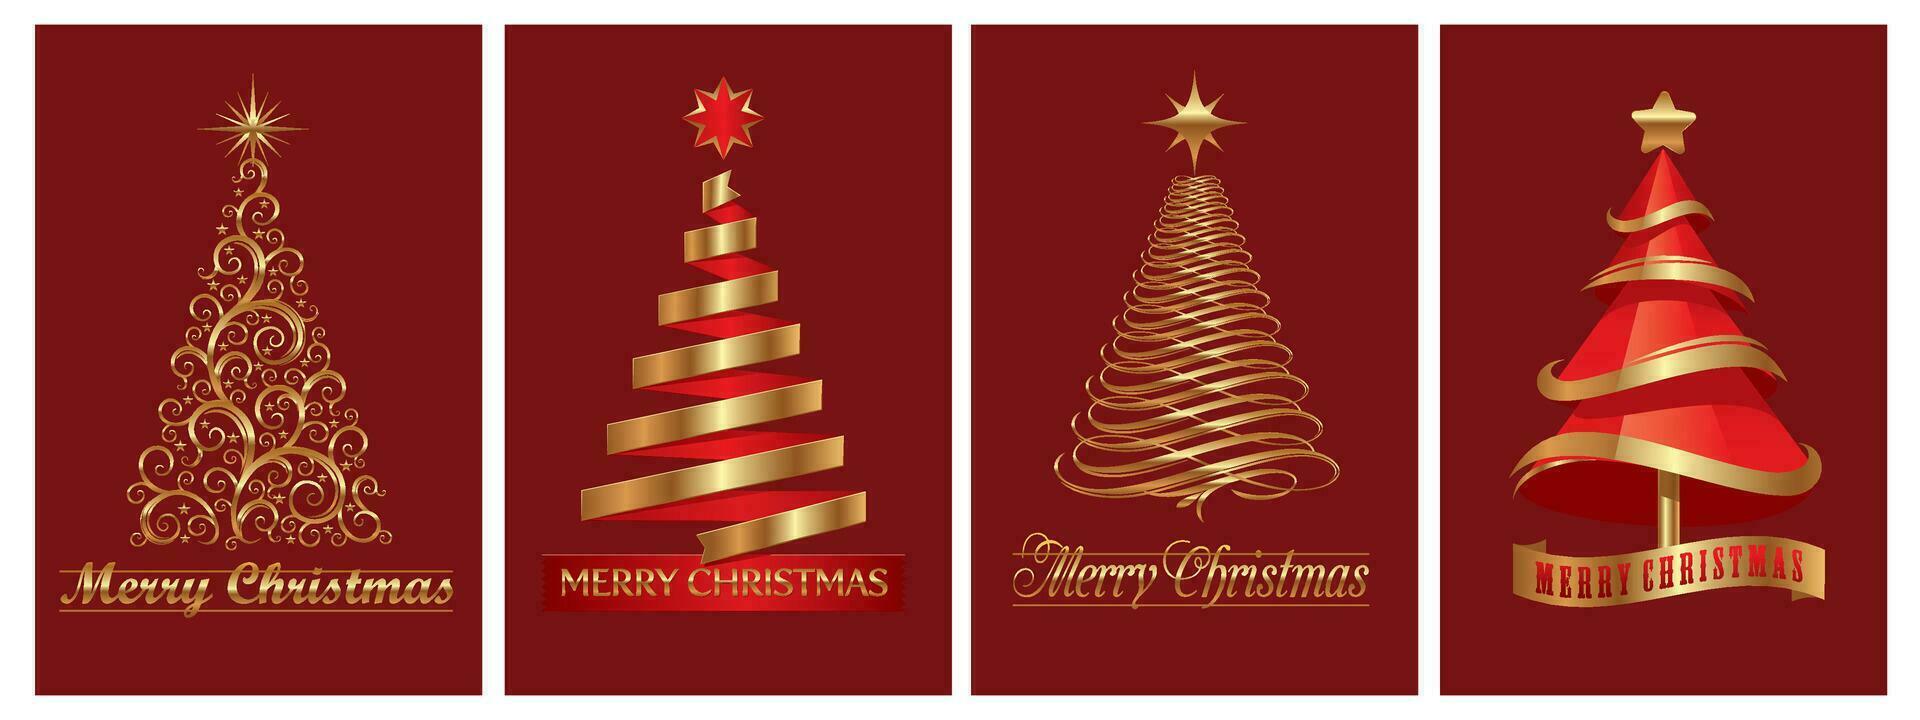 Collection of golden Christmas trees on a red background with stars on top, modern flat design. Can be used for printed materials - flyers, posters, business cards or for the web. vector